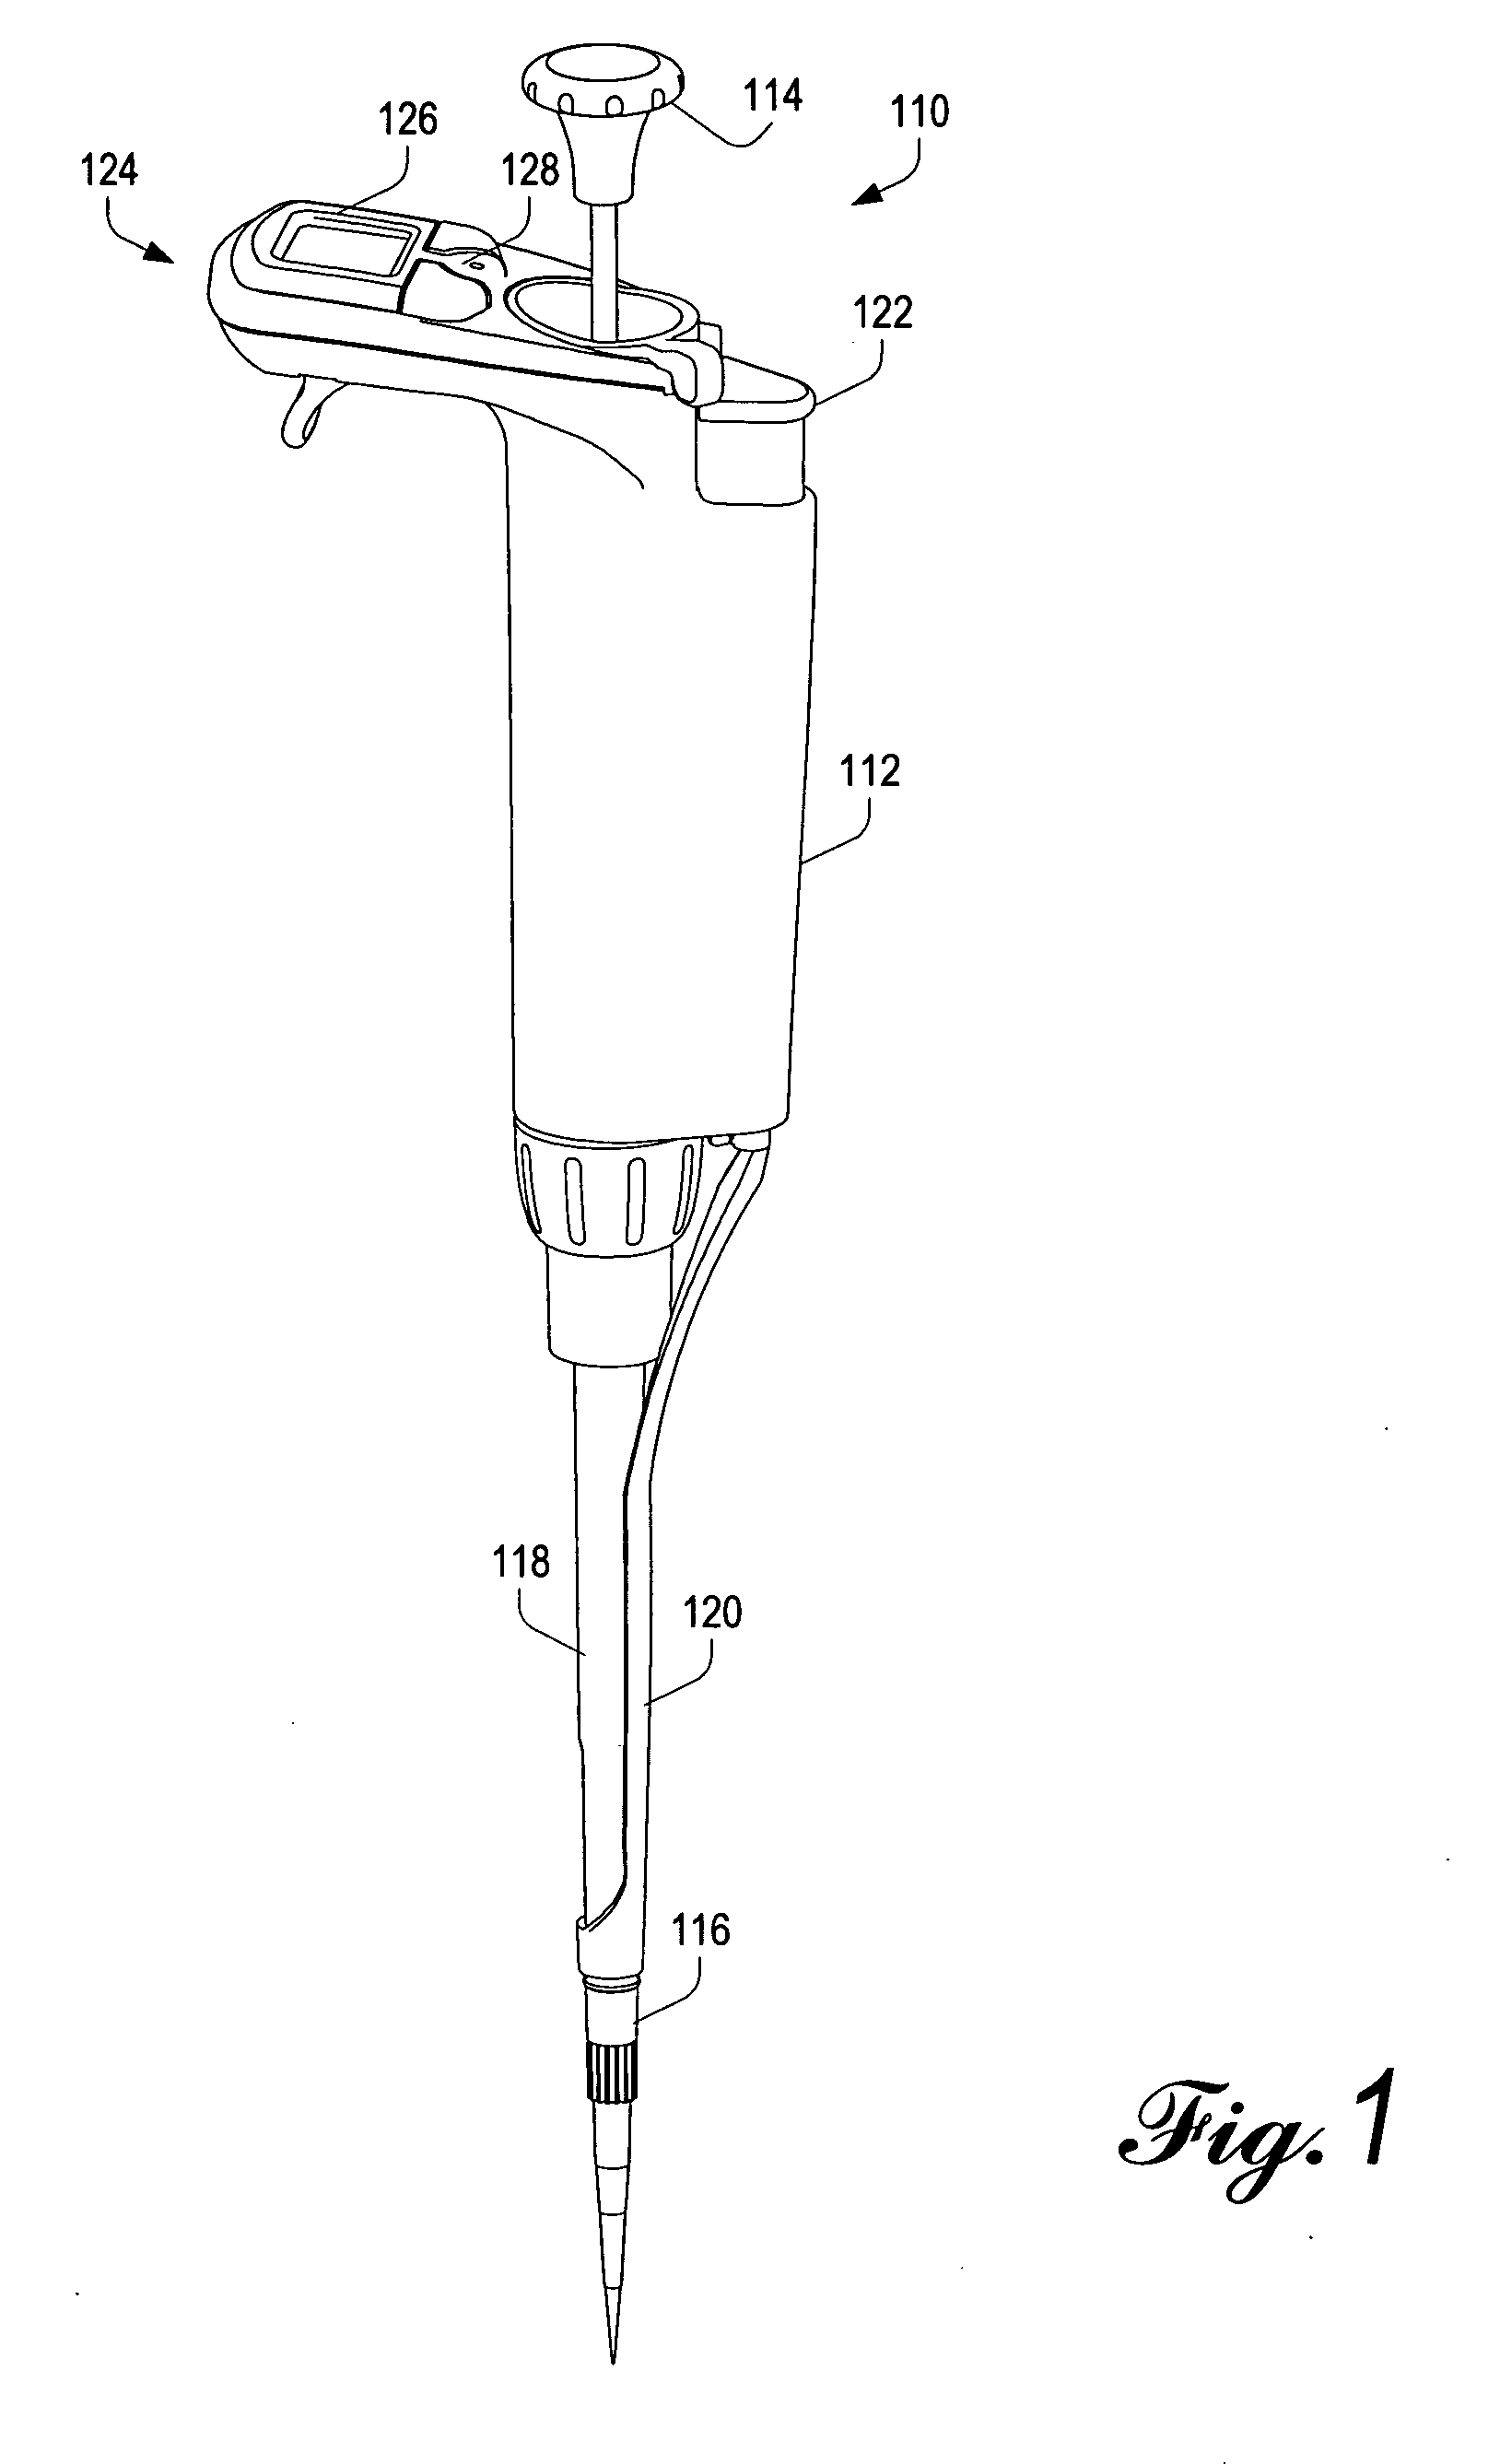 Hybrid manual-electronic pipette